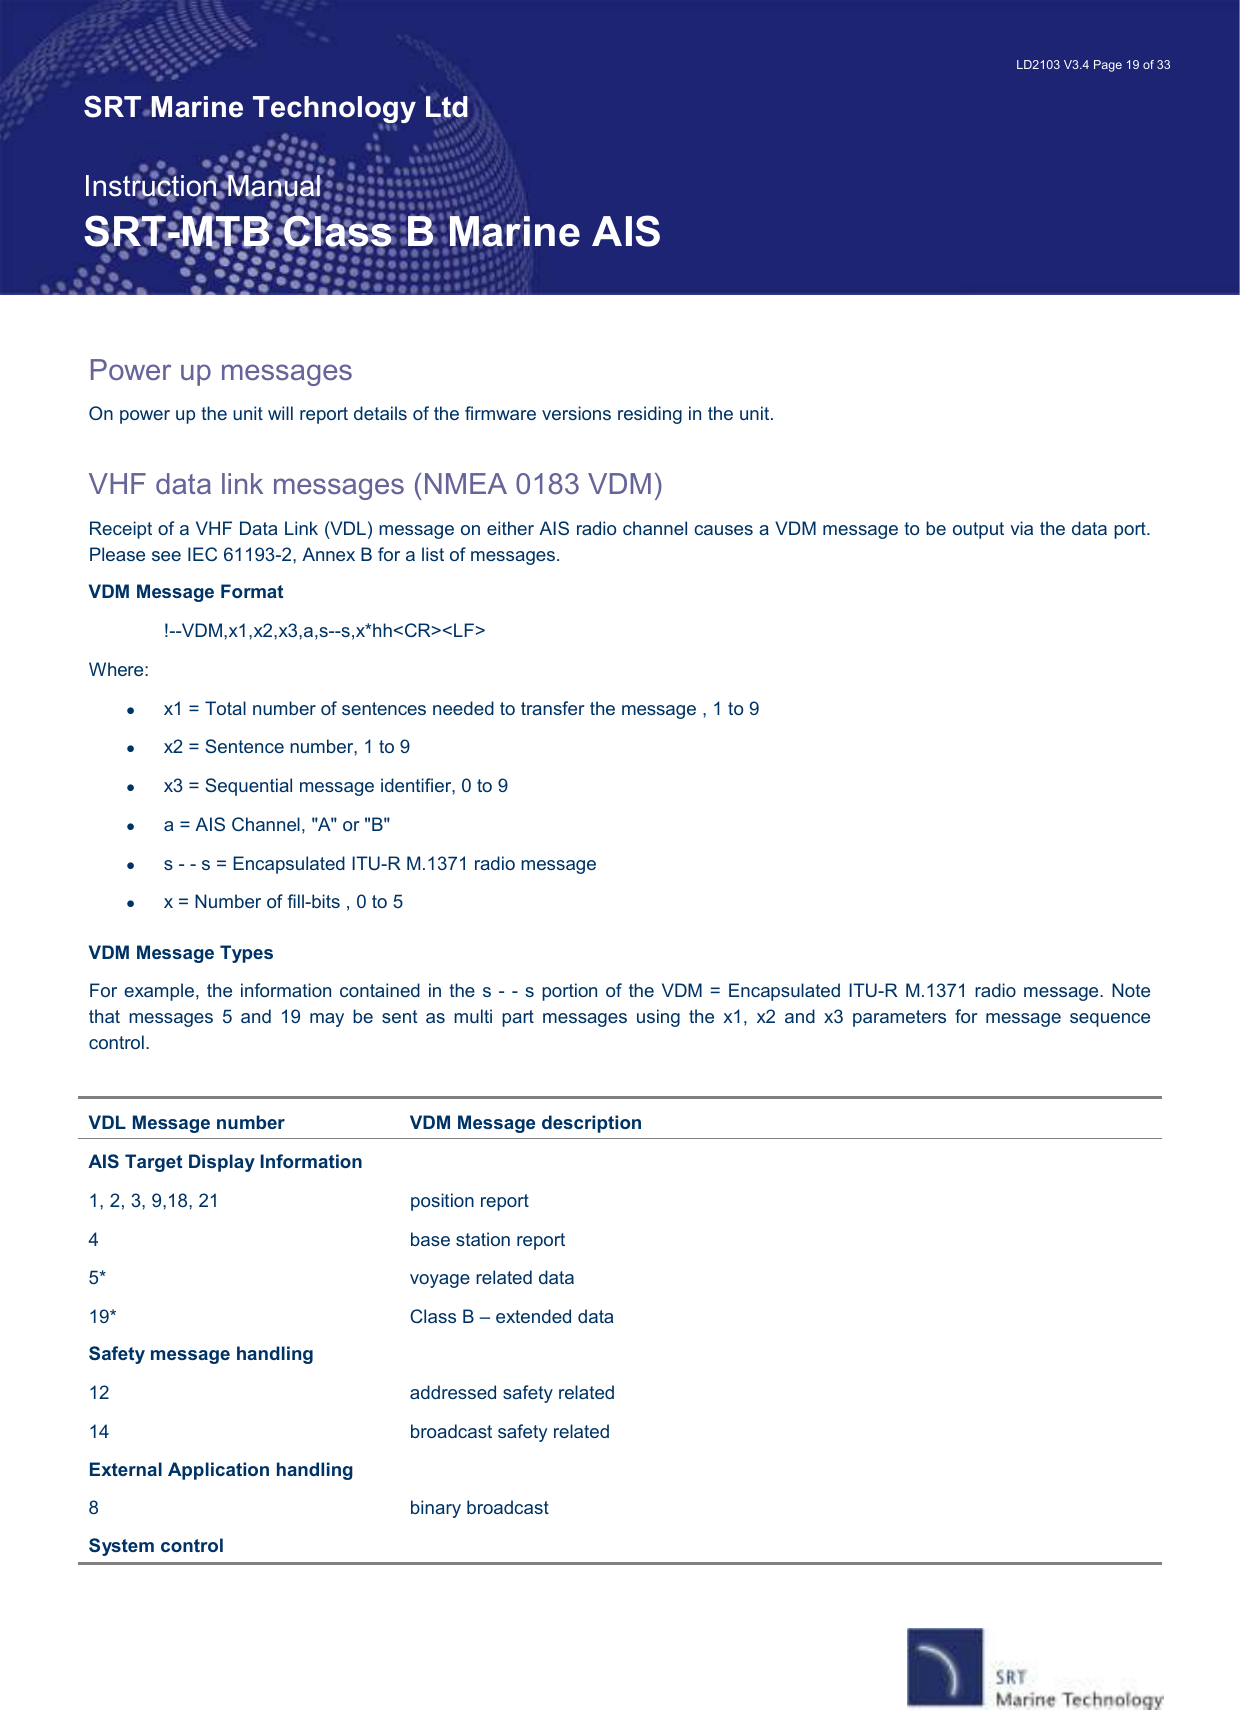   LD2103 V3.4 Page 19 of 33 SRT Marine Technology Ltd  Instruction Manual SRT-MTB Class B Marine AIS Power up messages On power up the unit will report details of the firmware versions residing in the unit.    VHF data link messages (NMEA 0183 VDM) Receipt of a VHF Data Link (VDL) message on either AIS radio channel causes a VDM message to be output via the data port. Please see IEC 61193-2, Annex B for a list of messages. VDM Message Format !--VDM,x1,x2,x3,a,s--s,x*hh&lt;CR&gt;&lt;LF&gt; Where: •  x1 = Total number of sentences needed to transfer the message , 1 to 9 •  x2 = Sentence number, 1 to 9 •  x3 = Sequential message identifier, 0 to 9 •  a = AIS Channel, &quot;A&quot; or &quot;B&quot; •  s - - s = Encapsulated ITU-R M.1371 radio message •  x = Number of fill-bits , 0 to 5 VDM Message Types  For example, the information contained in the s - - s portion of the VDM = Encapsulated ITU-R M.1371 radio message. Note that  messages  5  and  19  may  be  sent  as  multi  part  messages  using  the  x1,  x2  and  x3  parameters  for  message  sequence control.  VDL Message number  VDM Message description AIS Target Display Information 1, 2, 3, 9,18, 21  position report 4  base station report 5*  voyage related data 19*  Class B – extended data Safety message handling 12  addressed safety related 14  broadcast safety related External Application handling  8  binary broadcast System control 